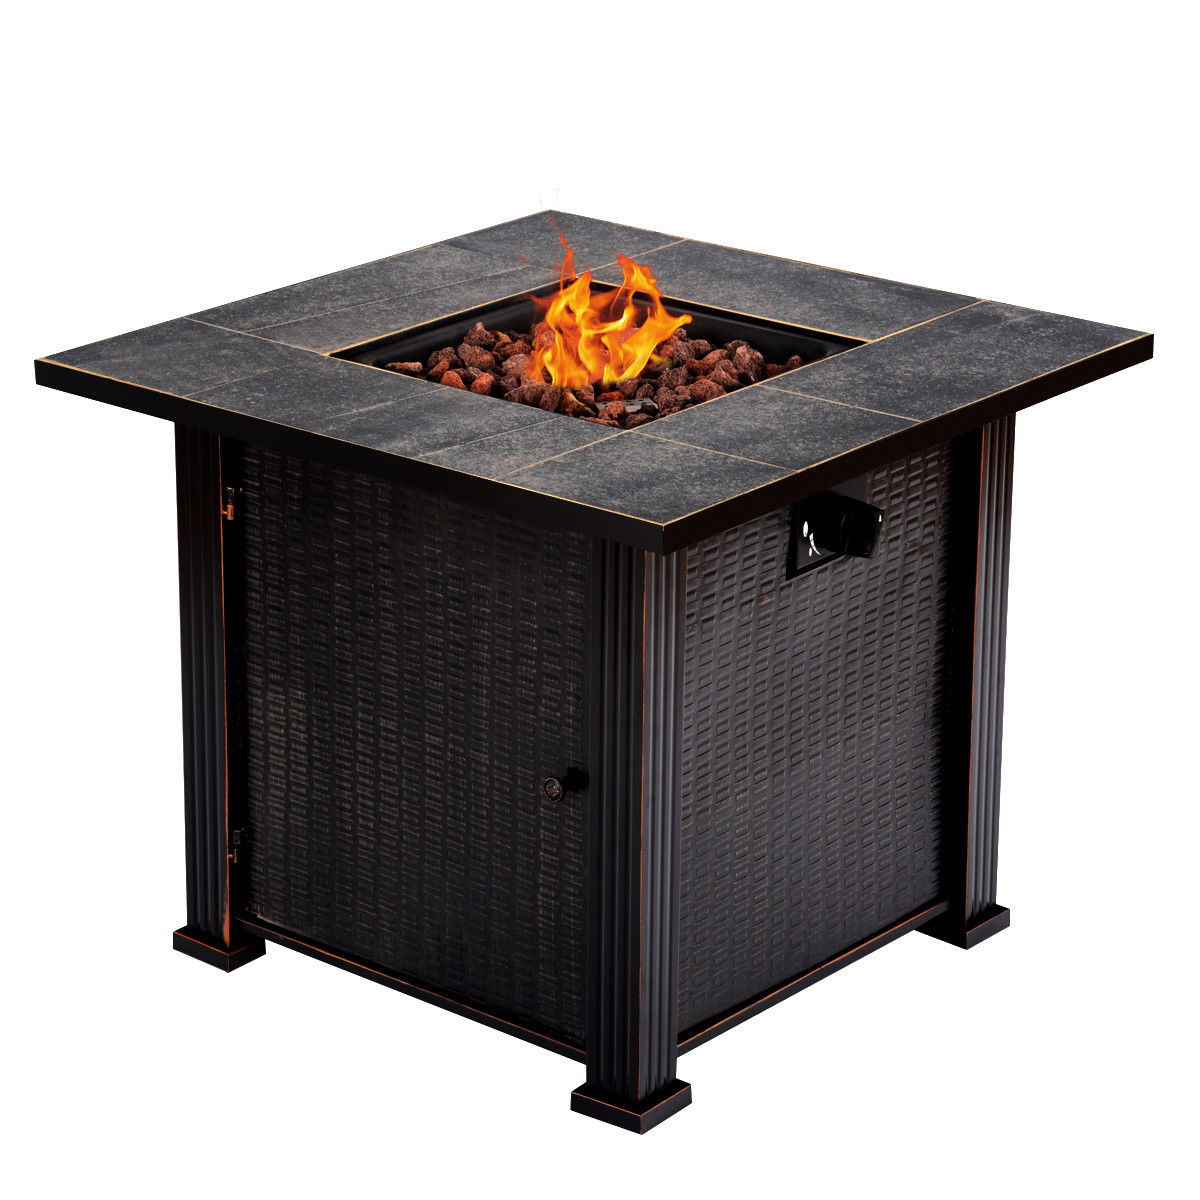 Costway Costway 30 Square Propane Gas Fire Pit 50000 Btus Heater pertaining to dimensions 1200 X 1200